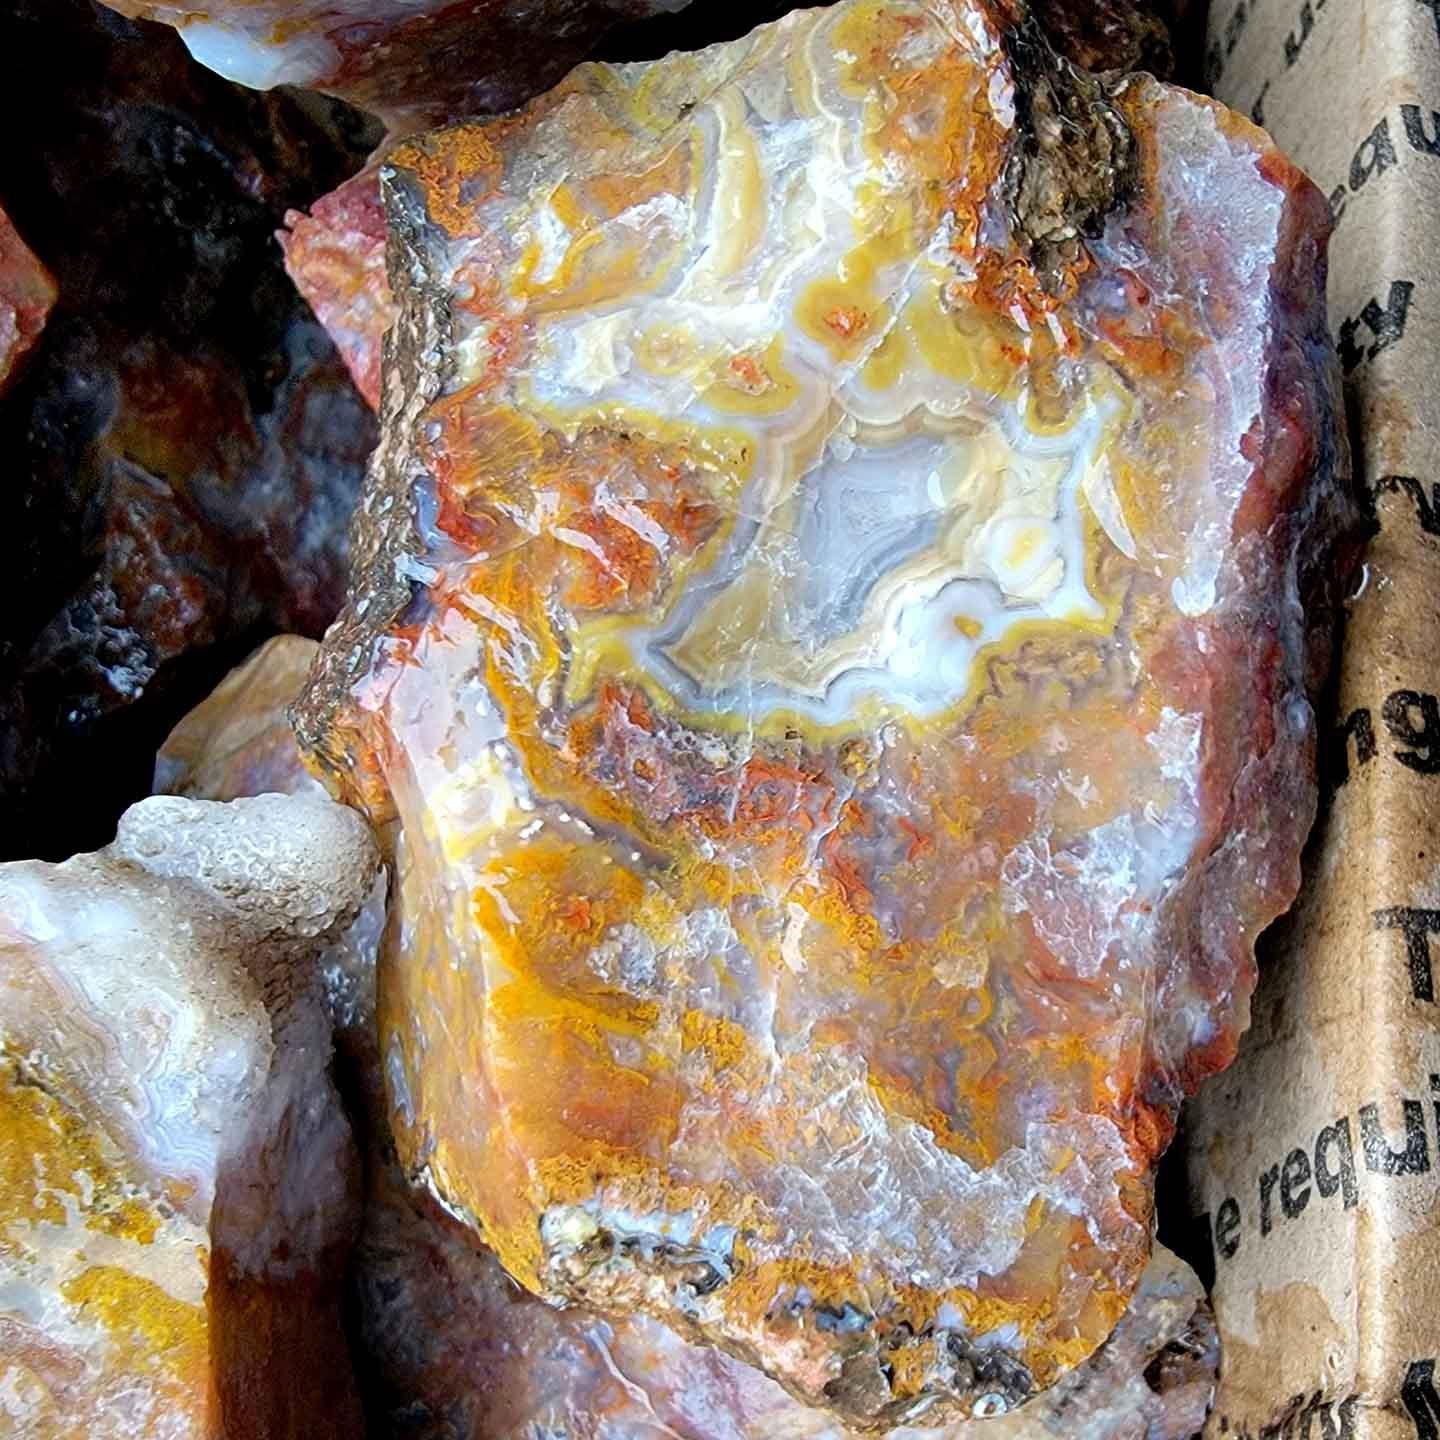 Mystery Moss Agate Possibly Agua Nueva Agate! - LapidaryCentral